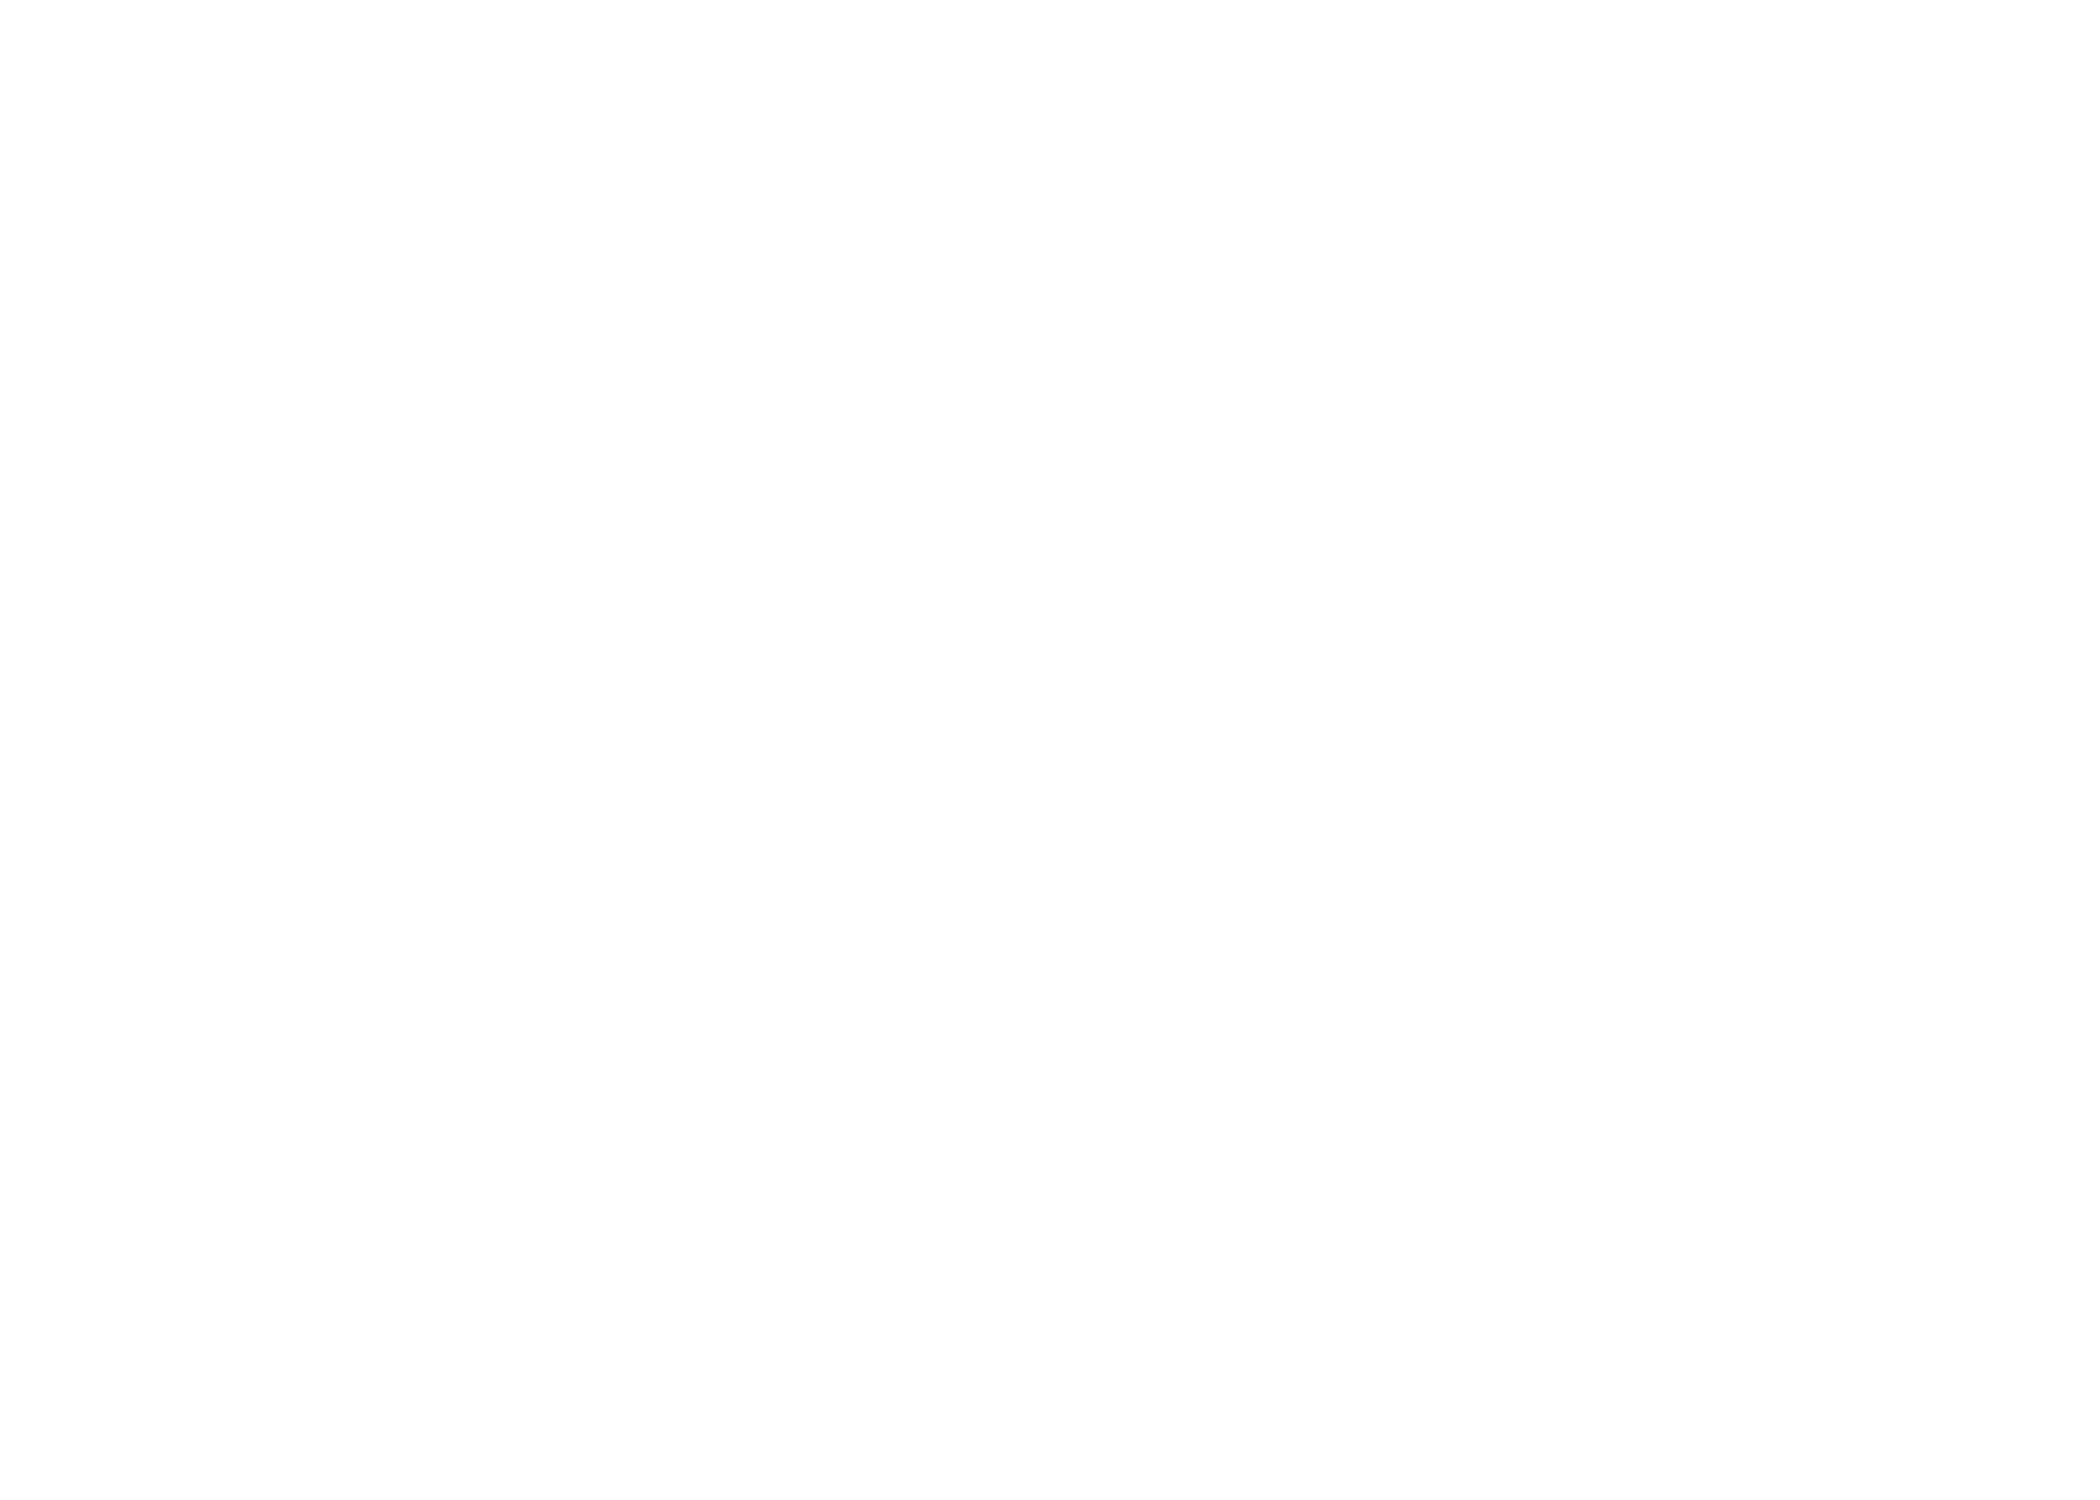 QPIFF 2020 Official Coronet Selection Laurel_First Quarter (WHITE).png